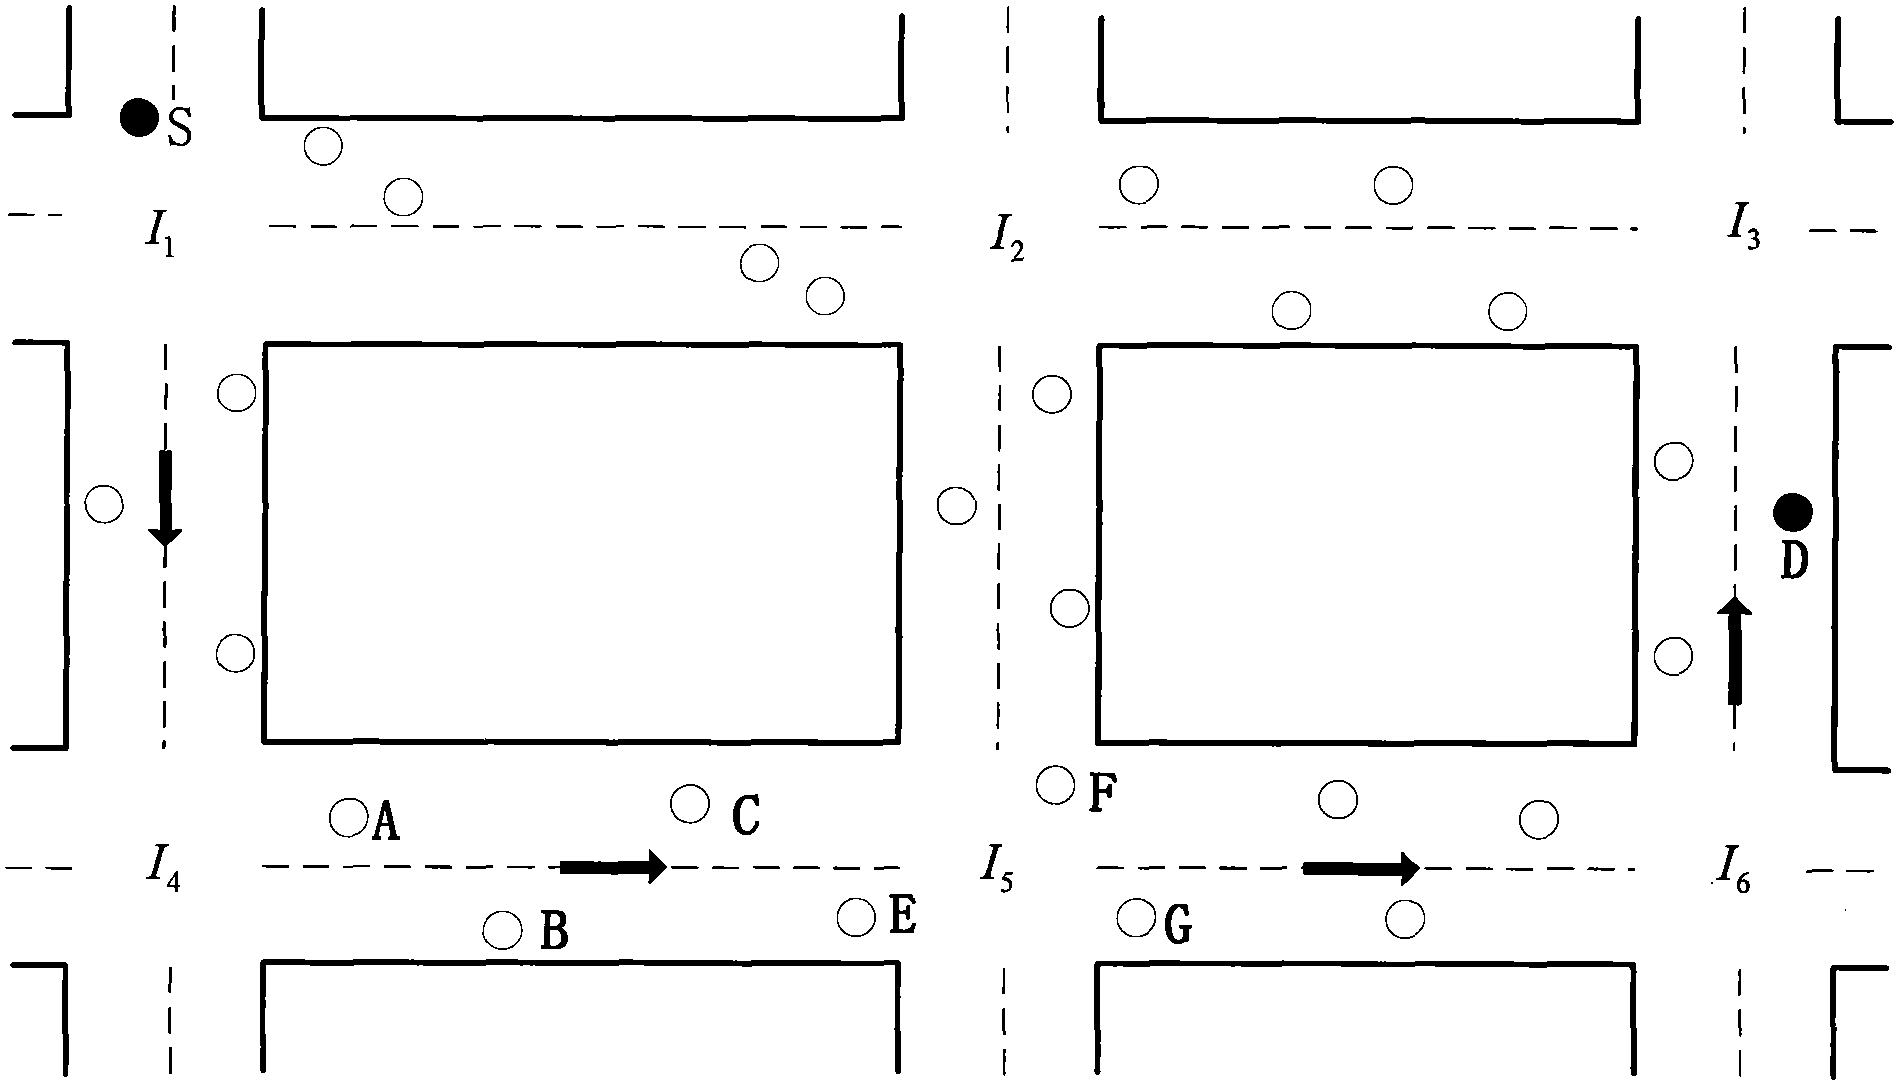 Connectivity sensing routing method on basis of location prediction in vehicle ad hoc network